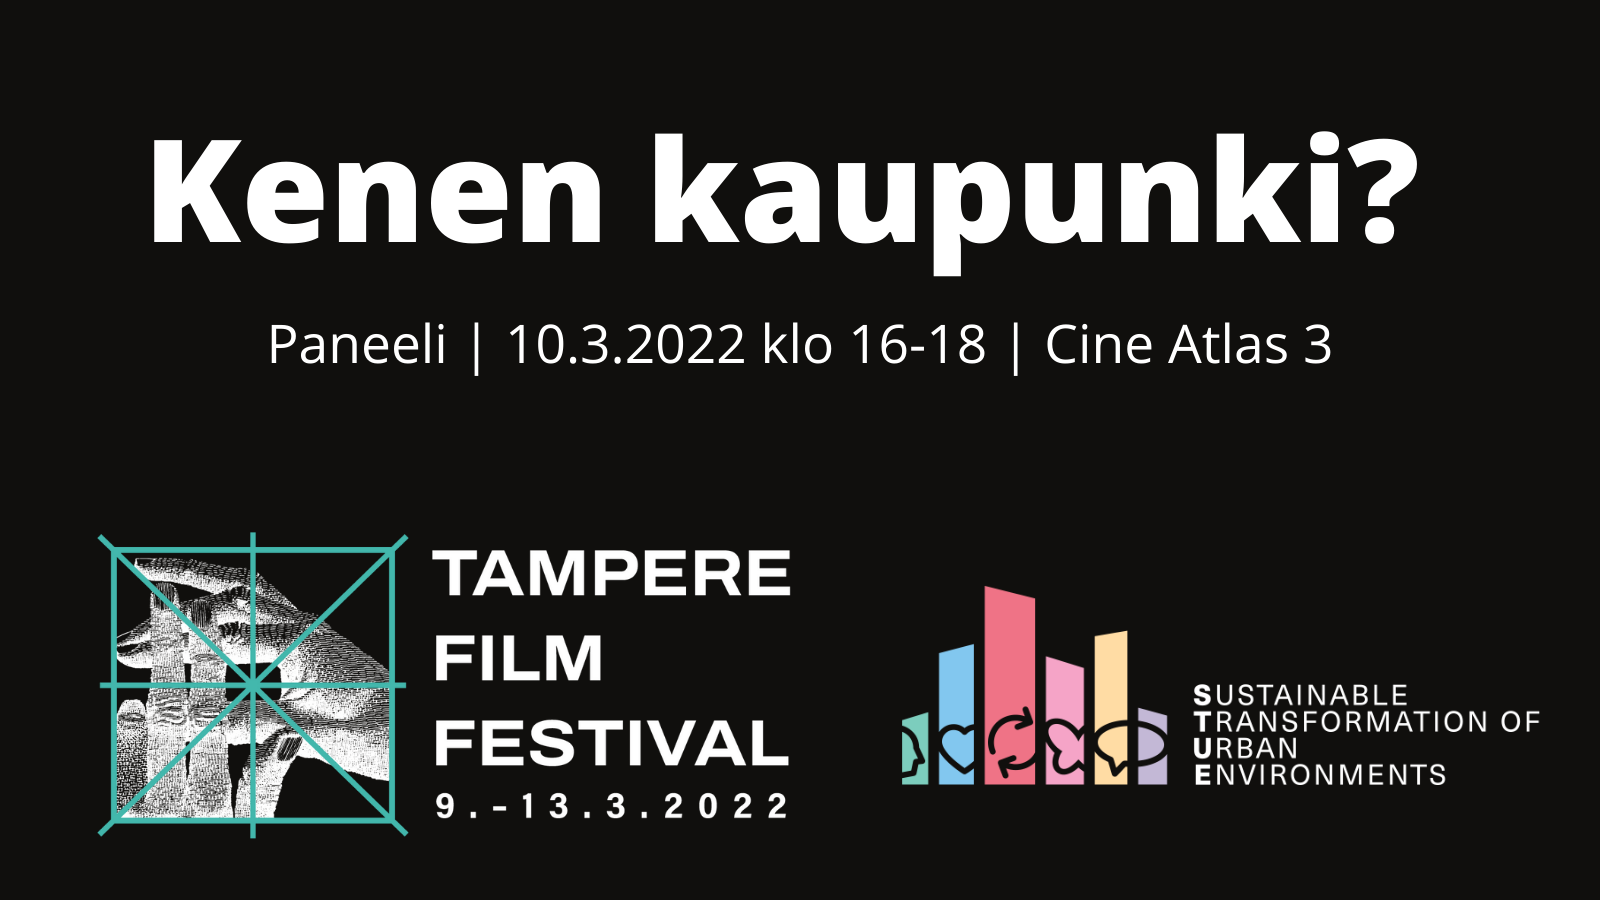 Finnish panel discussion "Kenen kaupunki" will be organised by Tampere Film Festival and STUE.